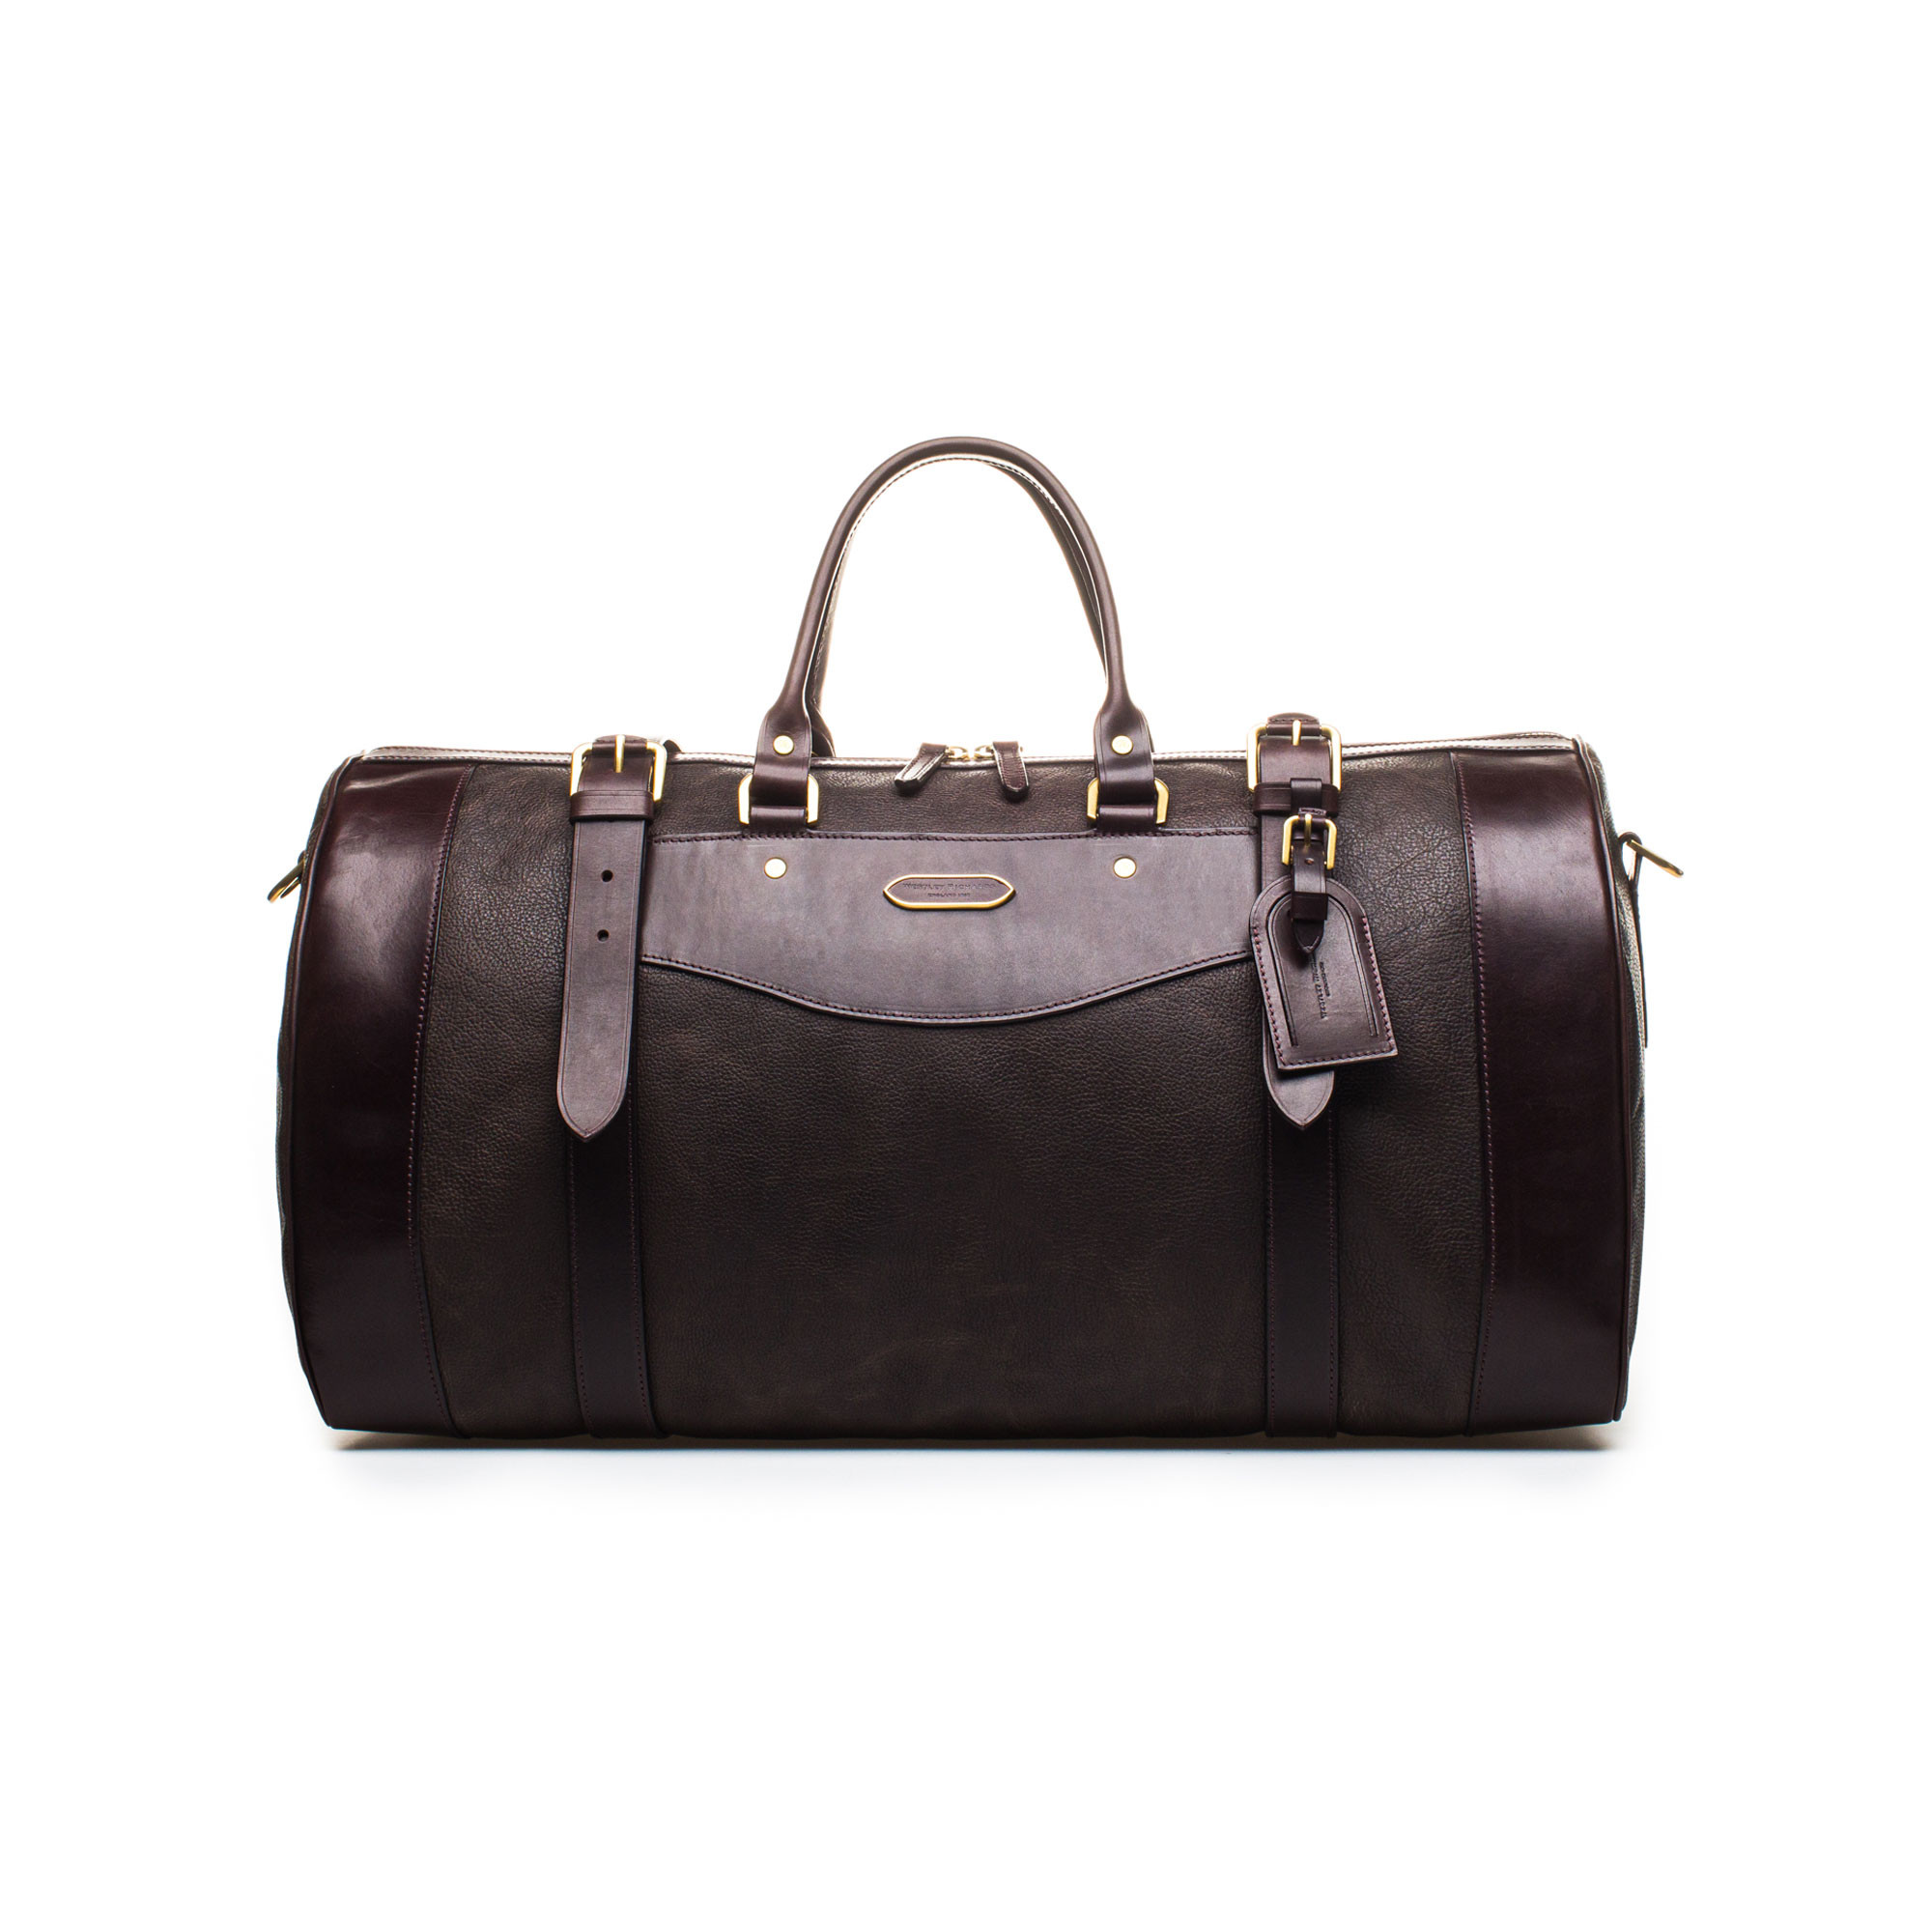 Buffalo Leather Laptop Bag Manufacturer Exporter from Kanpur India